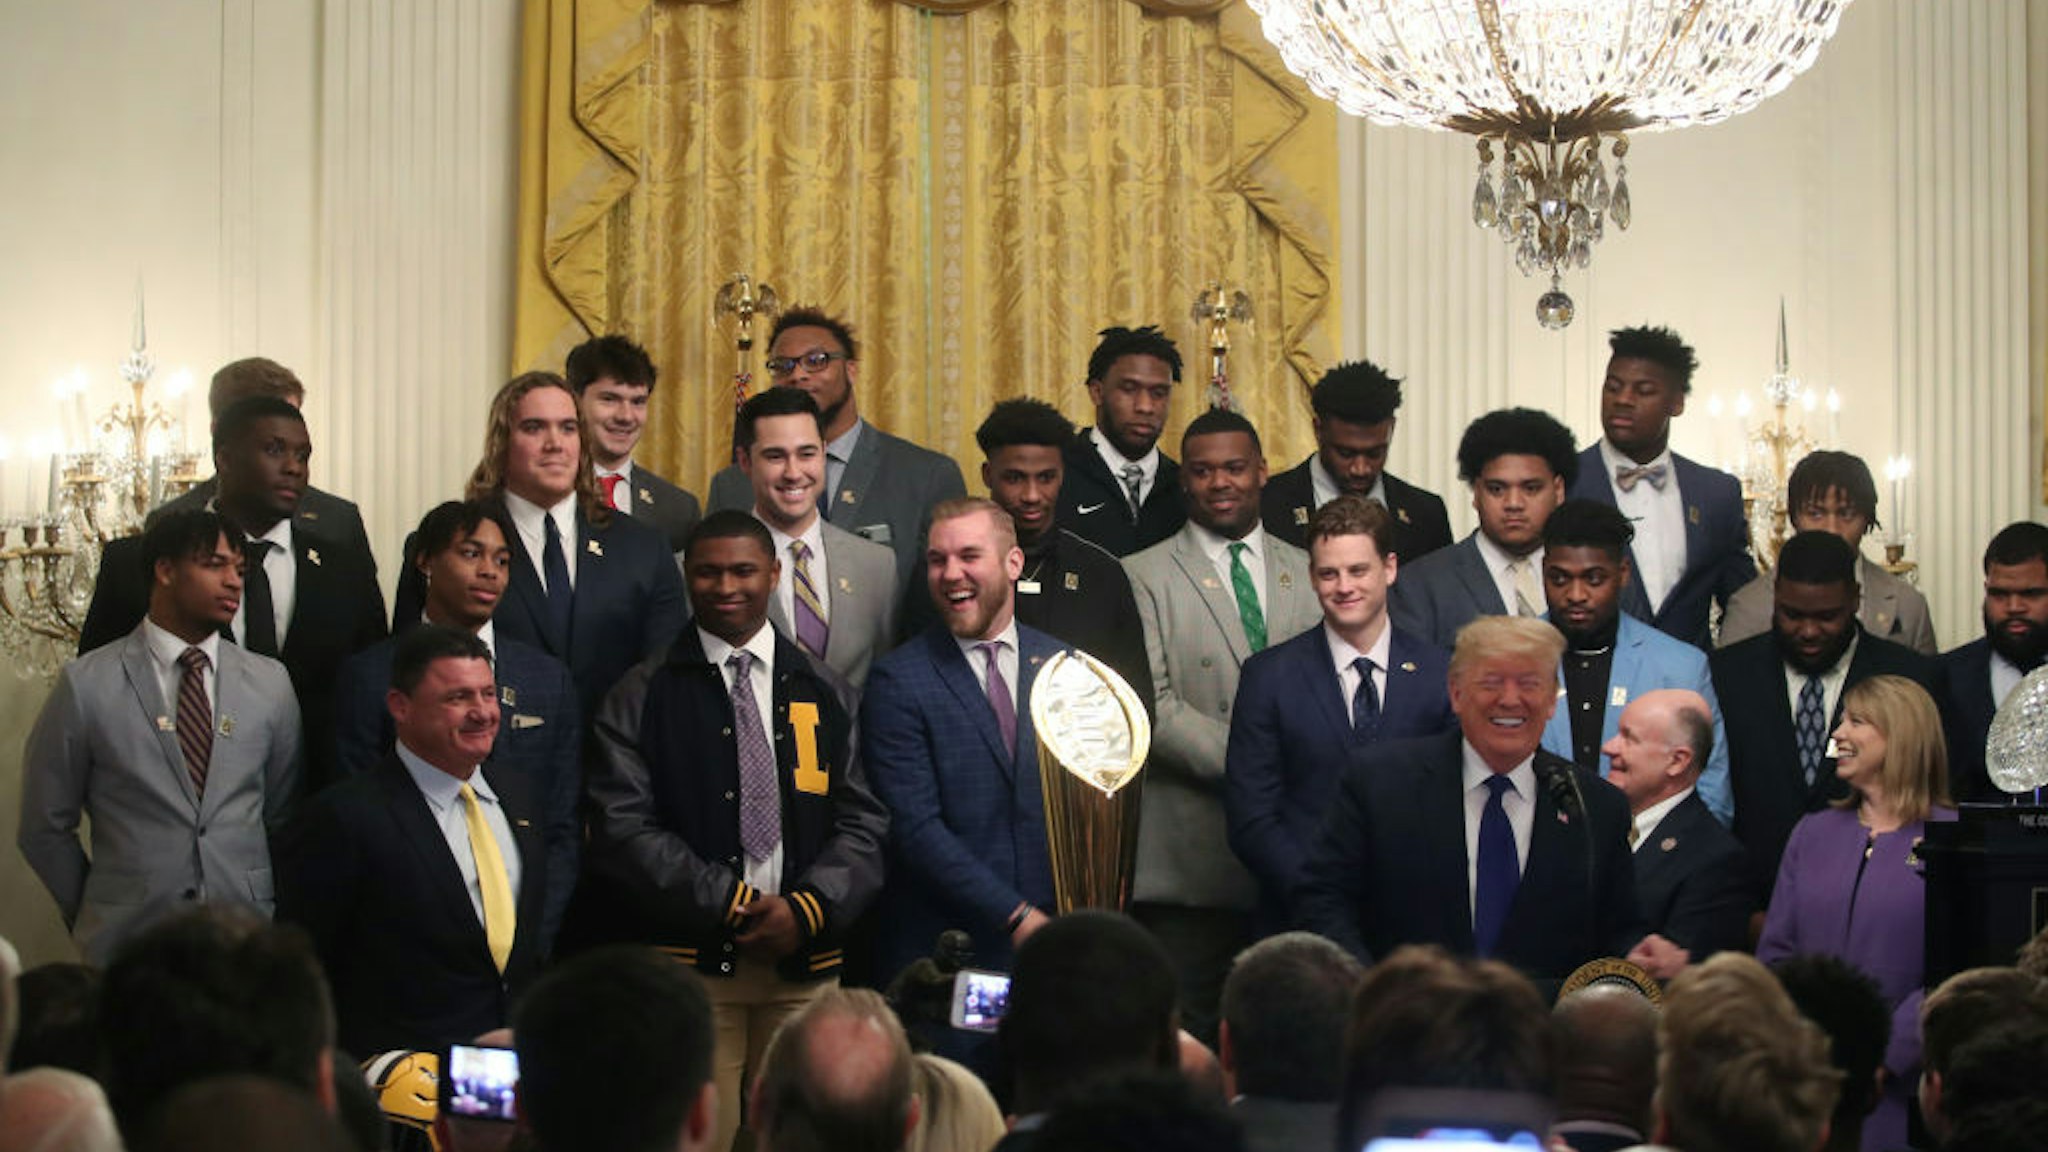 U.S. President Donald Trump welcomes the Louisiana State University football team in the East Room at the White House, on January 17, 2020 in Washington, DC.